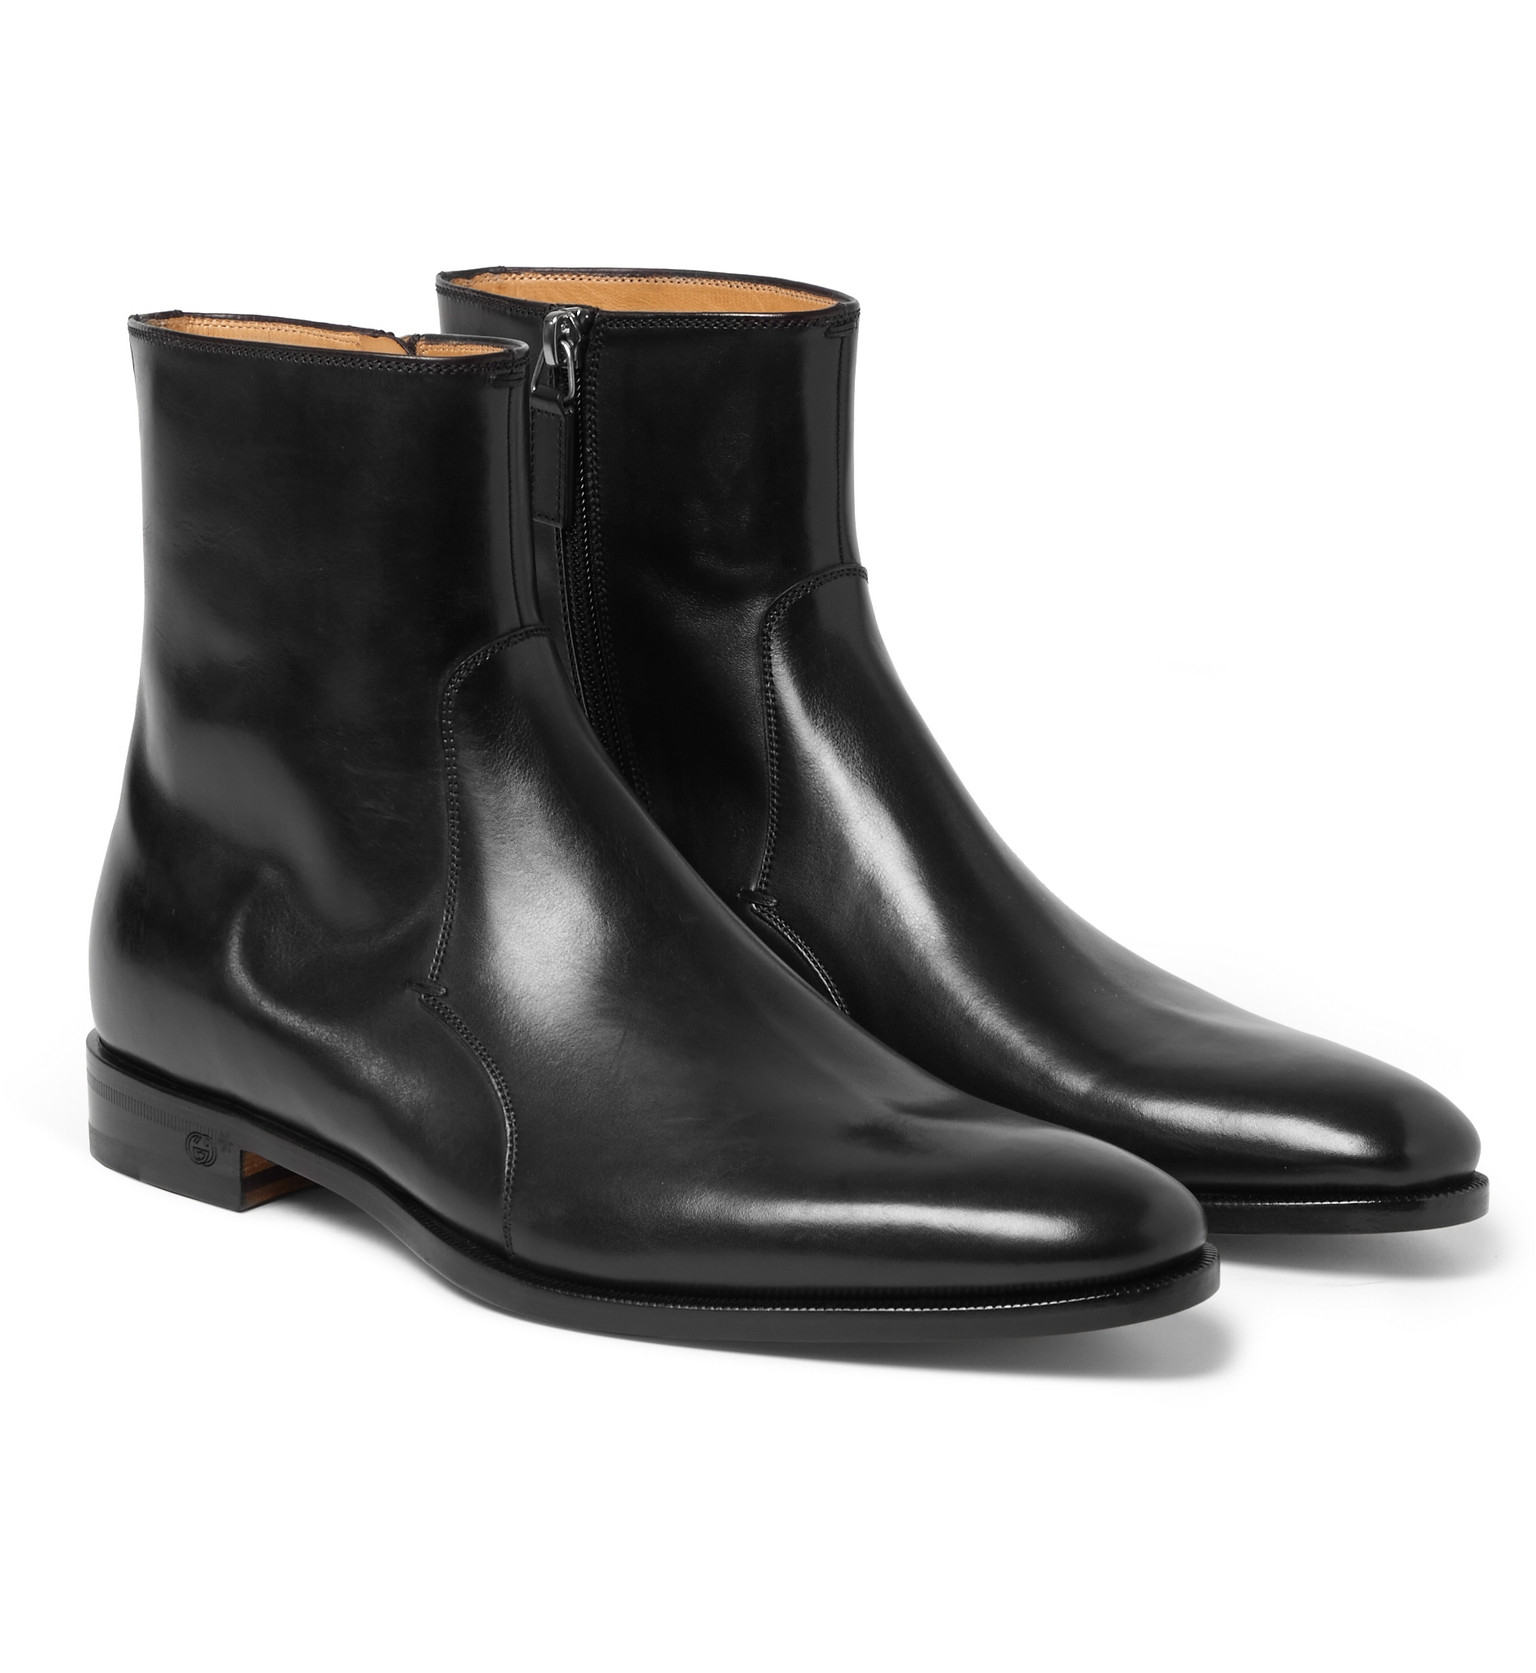 Gucci Leather Chelsea Boots in Black for Men - Lyst